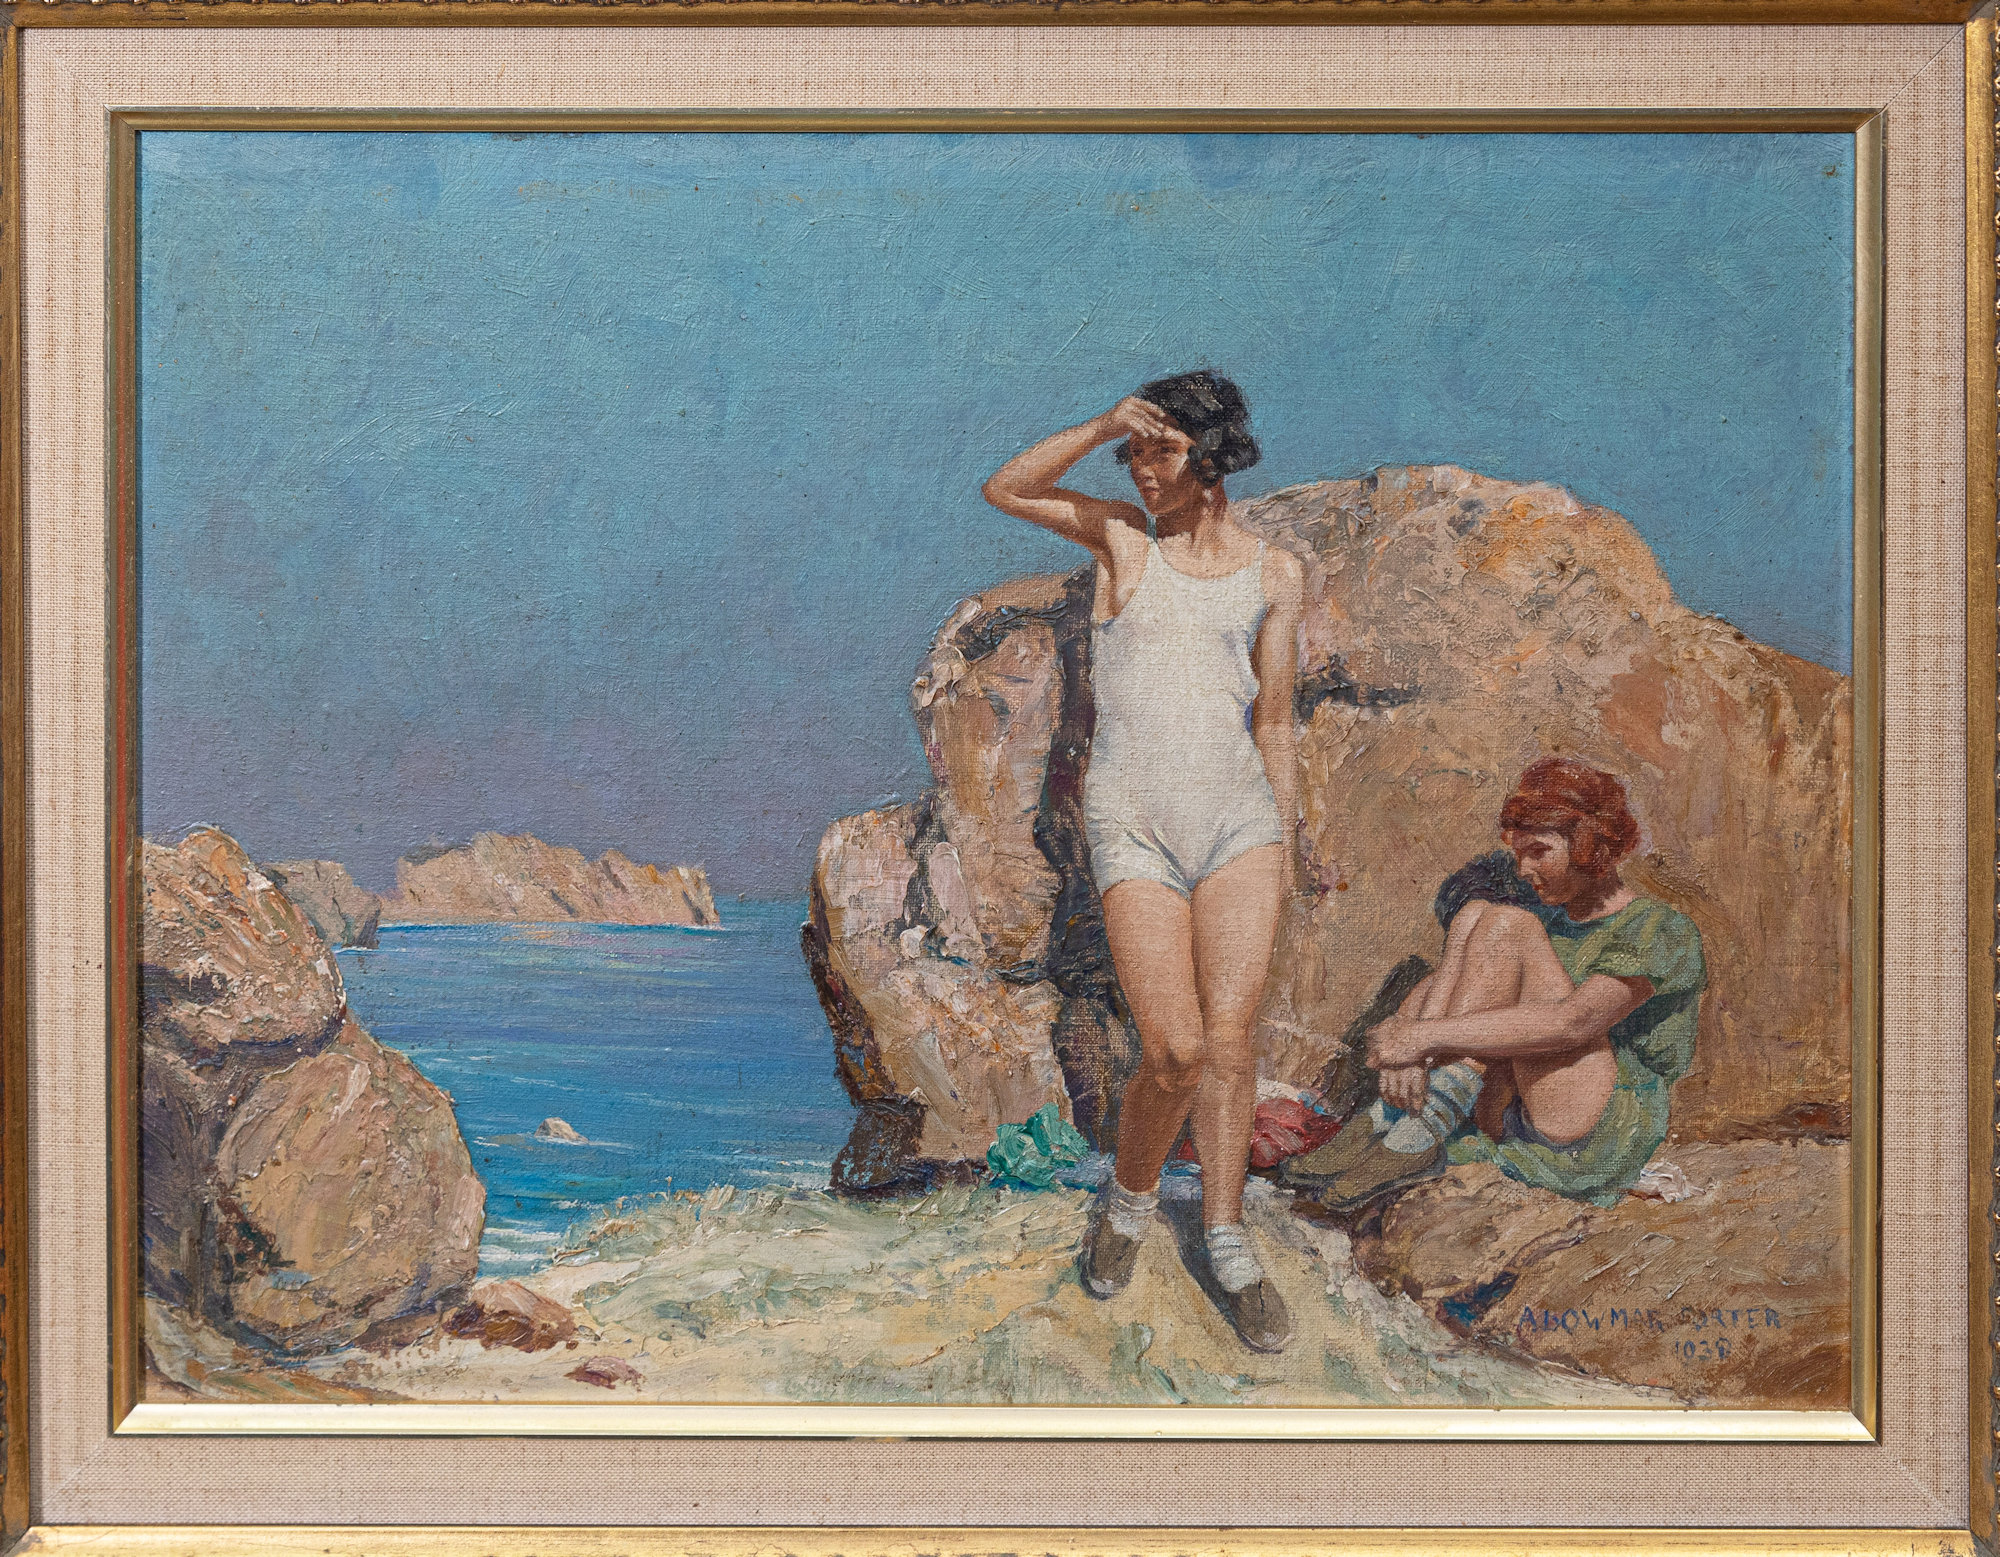 Arthur Bowmar Porter (British, c.1876-1960), The Bathers oil on board, signed and dated 1938 lower